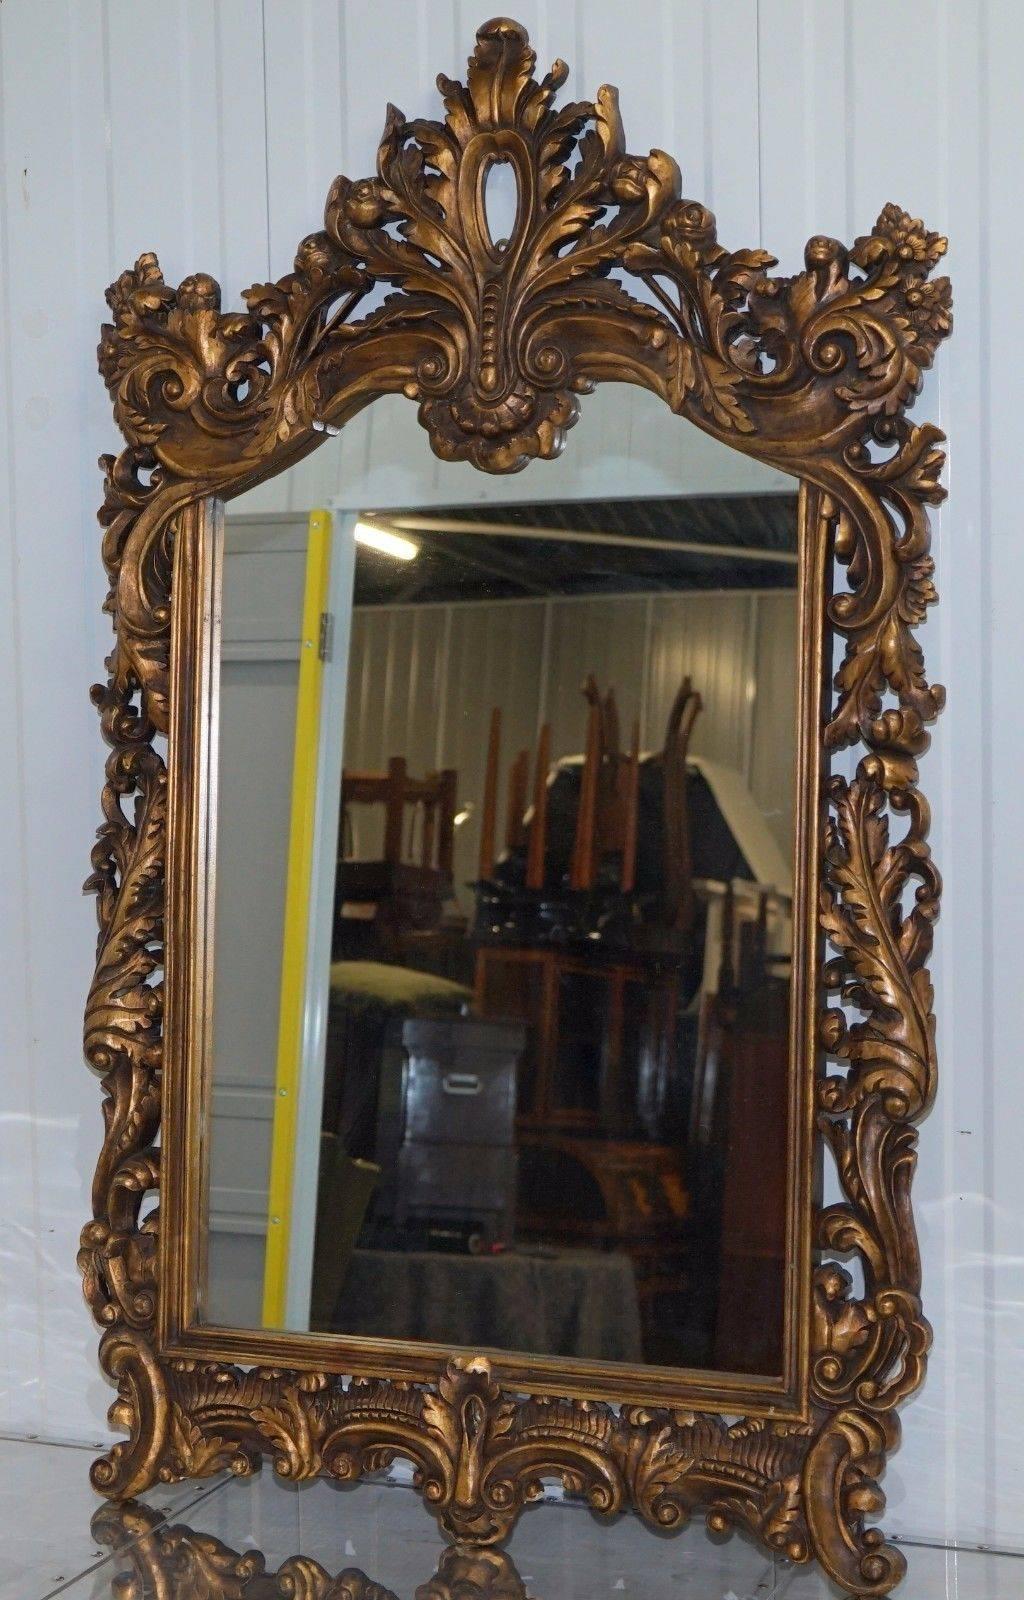 We are delighted to offer for sale this very nice pair of vintage hand-carved wood French rococo style ornate wall mirrors with gold leaf paint

A very good looking and highly decorative pair in excellent condition, one mirror is missing a little